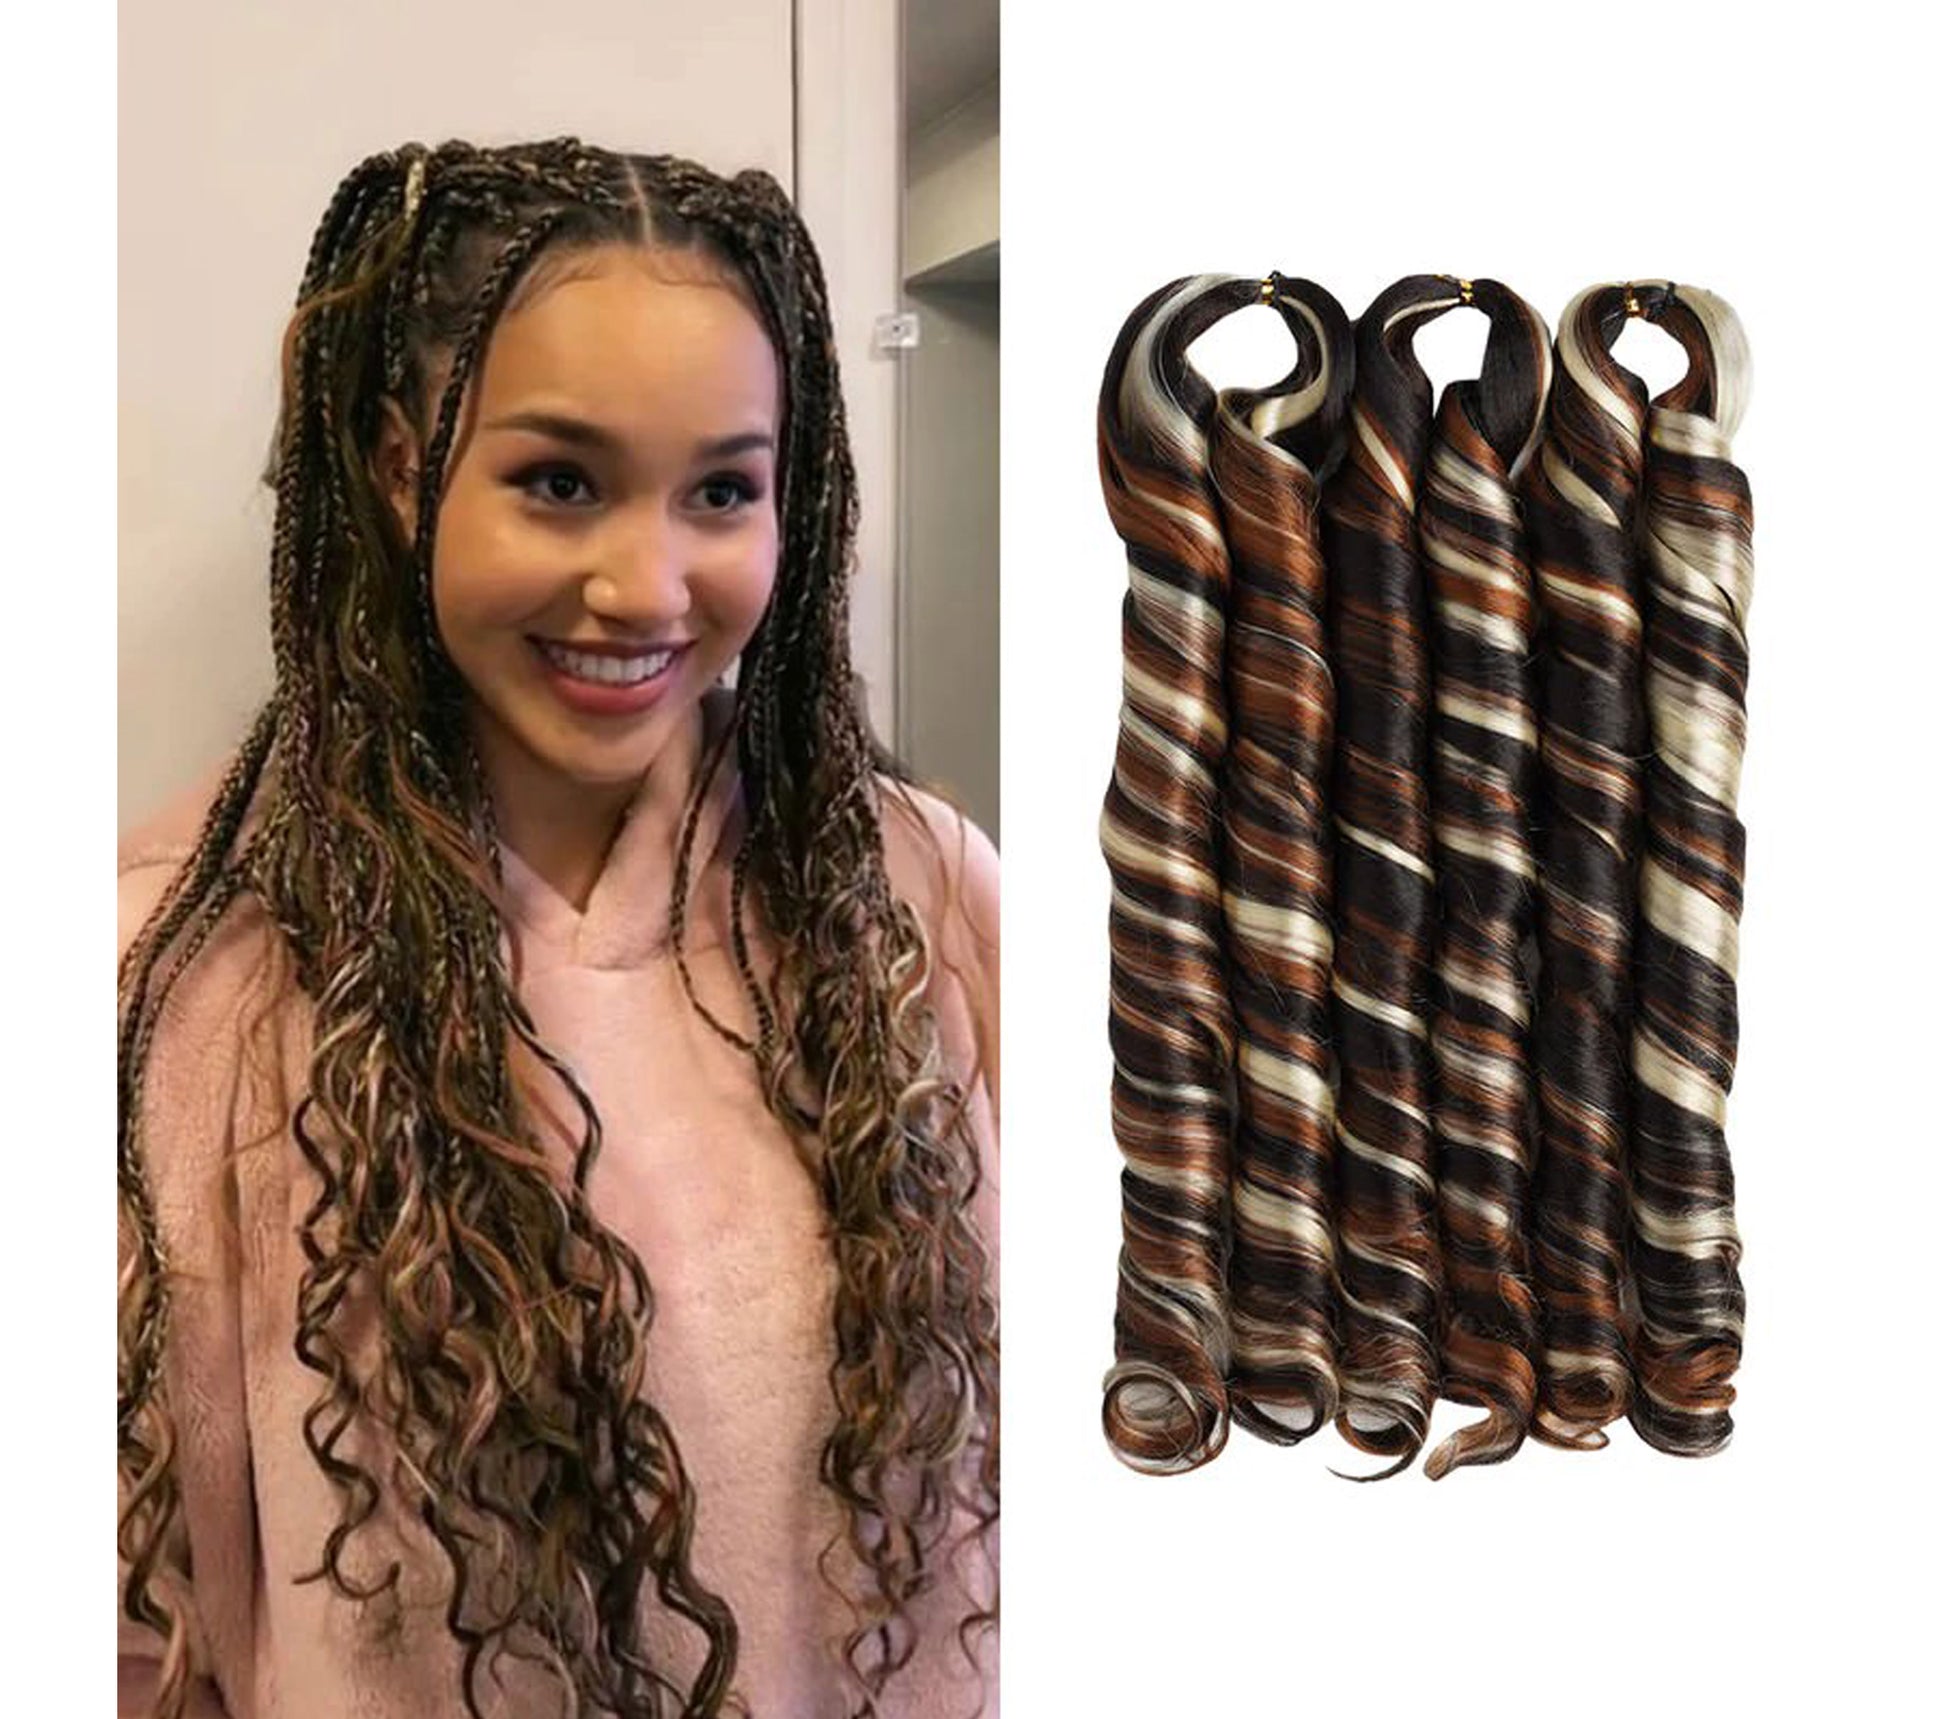 Authentic 3X French Curl Braid 22